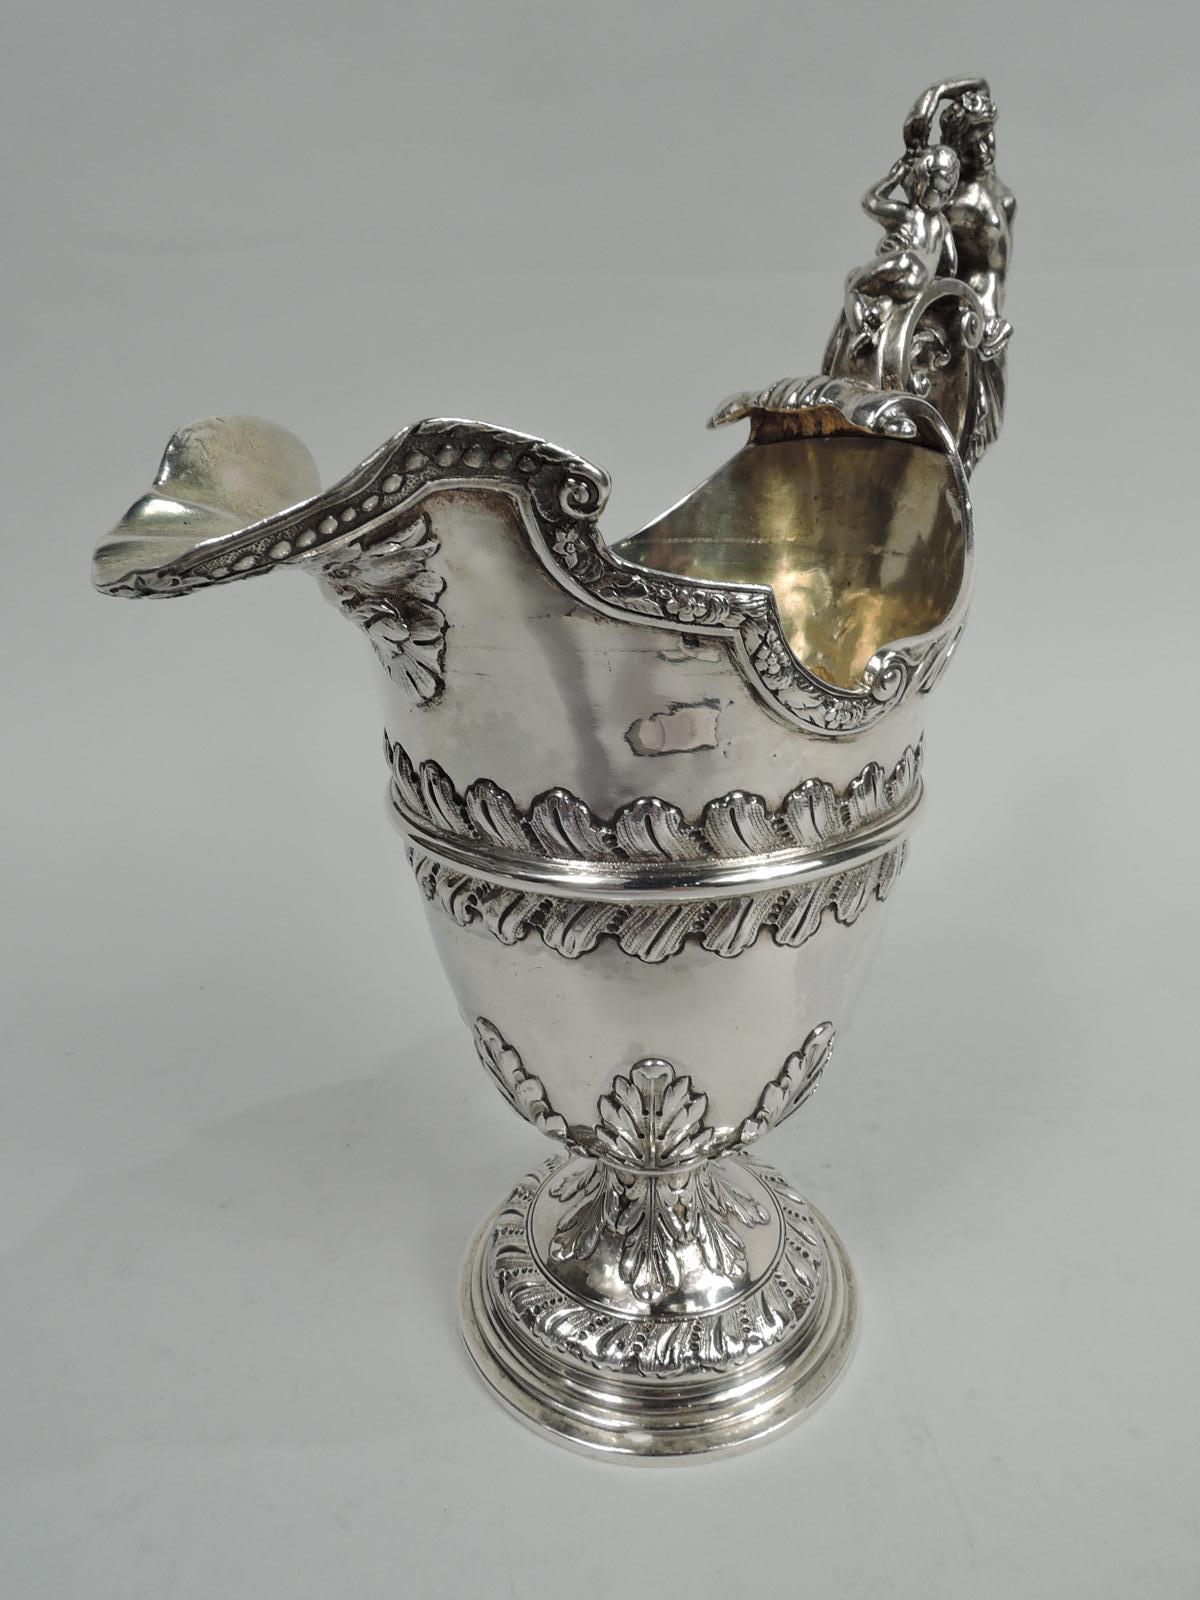 English Georgian Classical sterling silver ewer, 18th century. Girdled ovoid bowl and scrolled helmet mouth with beaded and flowering strapwork rim; cast double-scroll handle with Venus, her torso undraped offering grapes to recumbent Cupid. Satyr